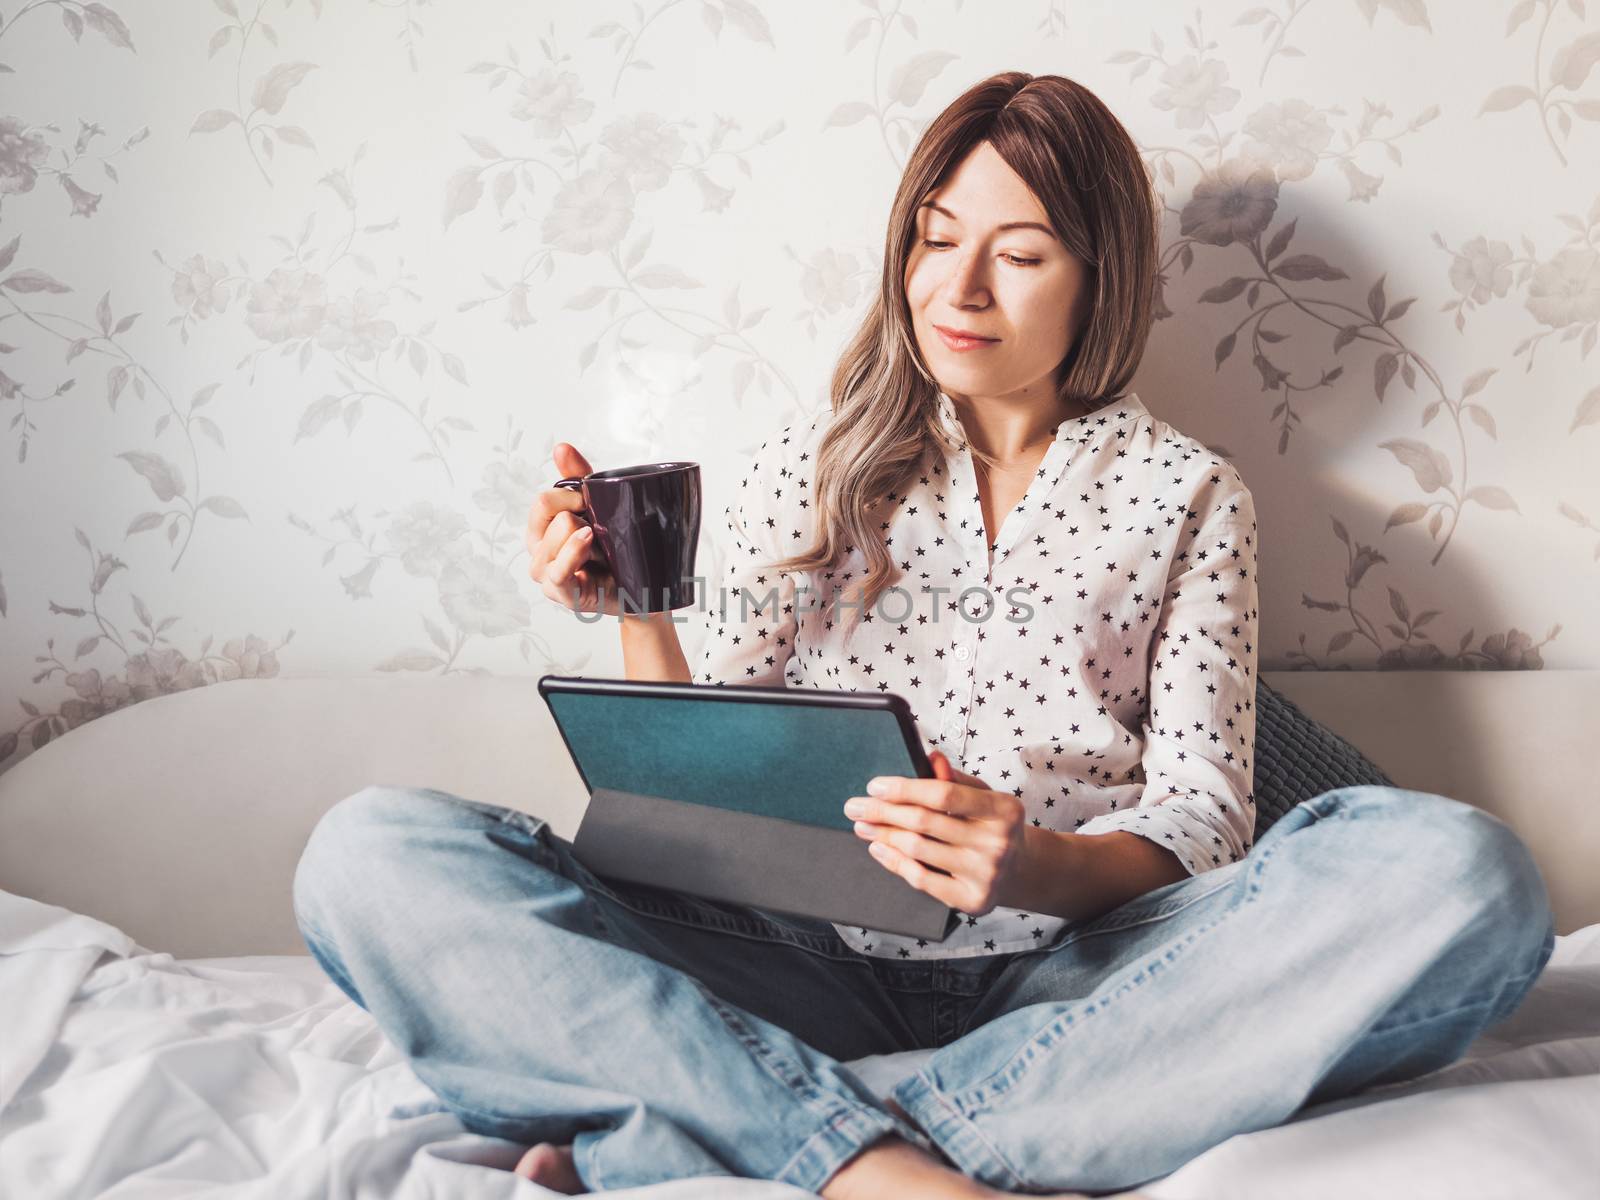 Woman sits on bed with tablet PC and cup of hot coffee. She watches online TV series. Online video call or conference, distance learning, remote education. Self isolation during quarantine.